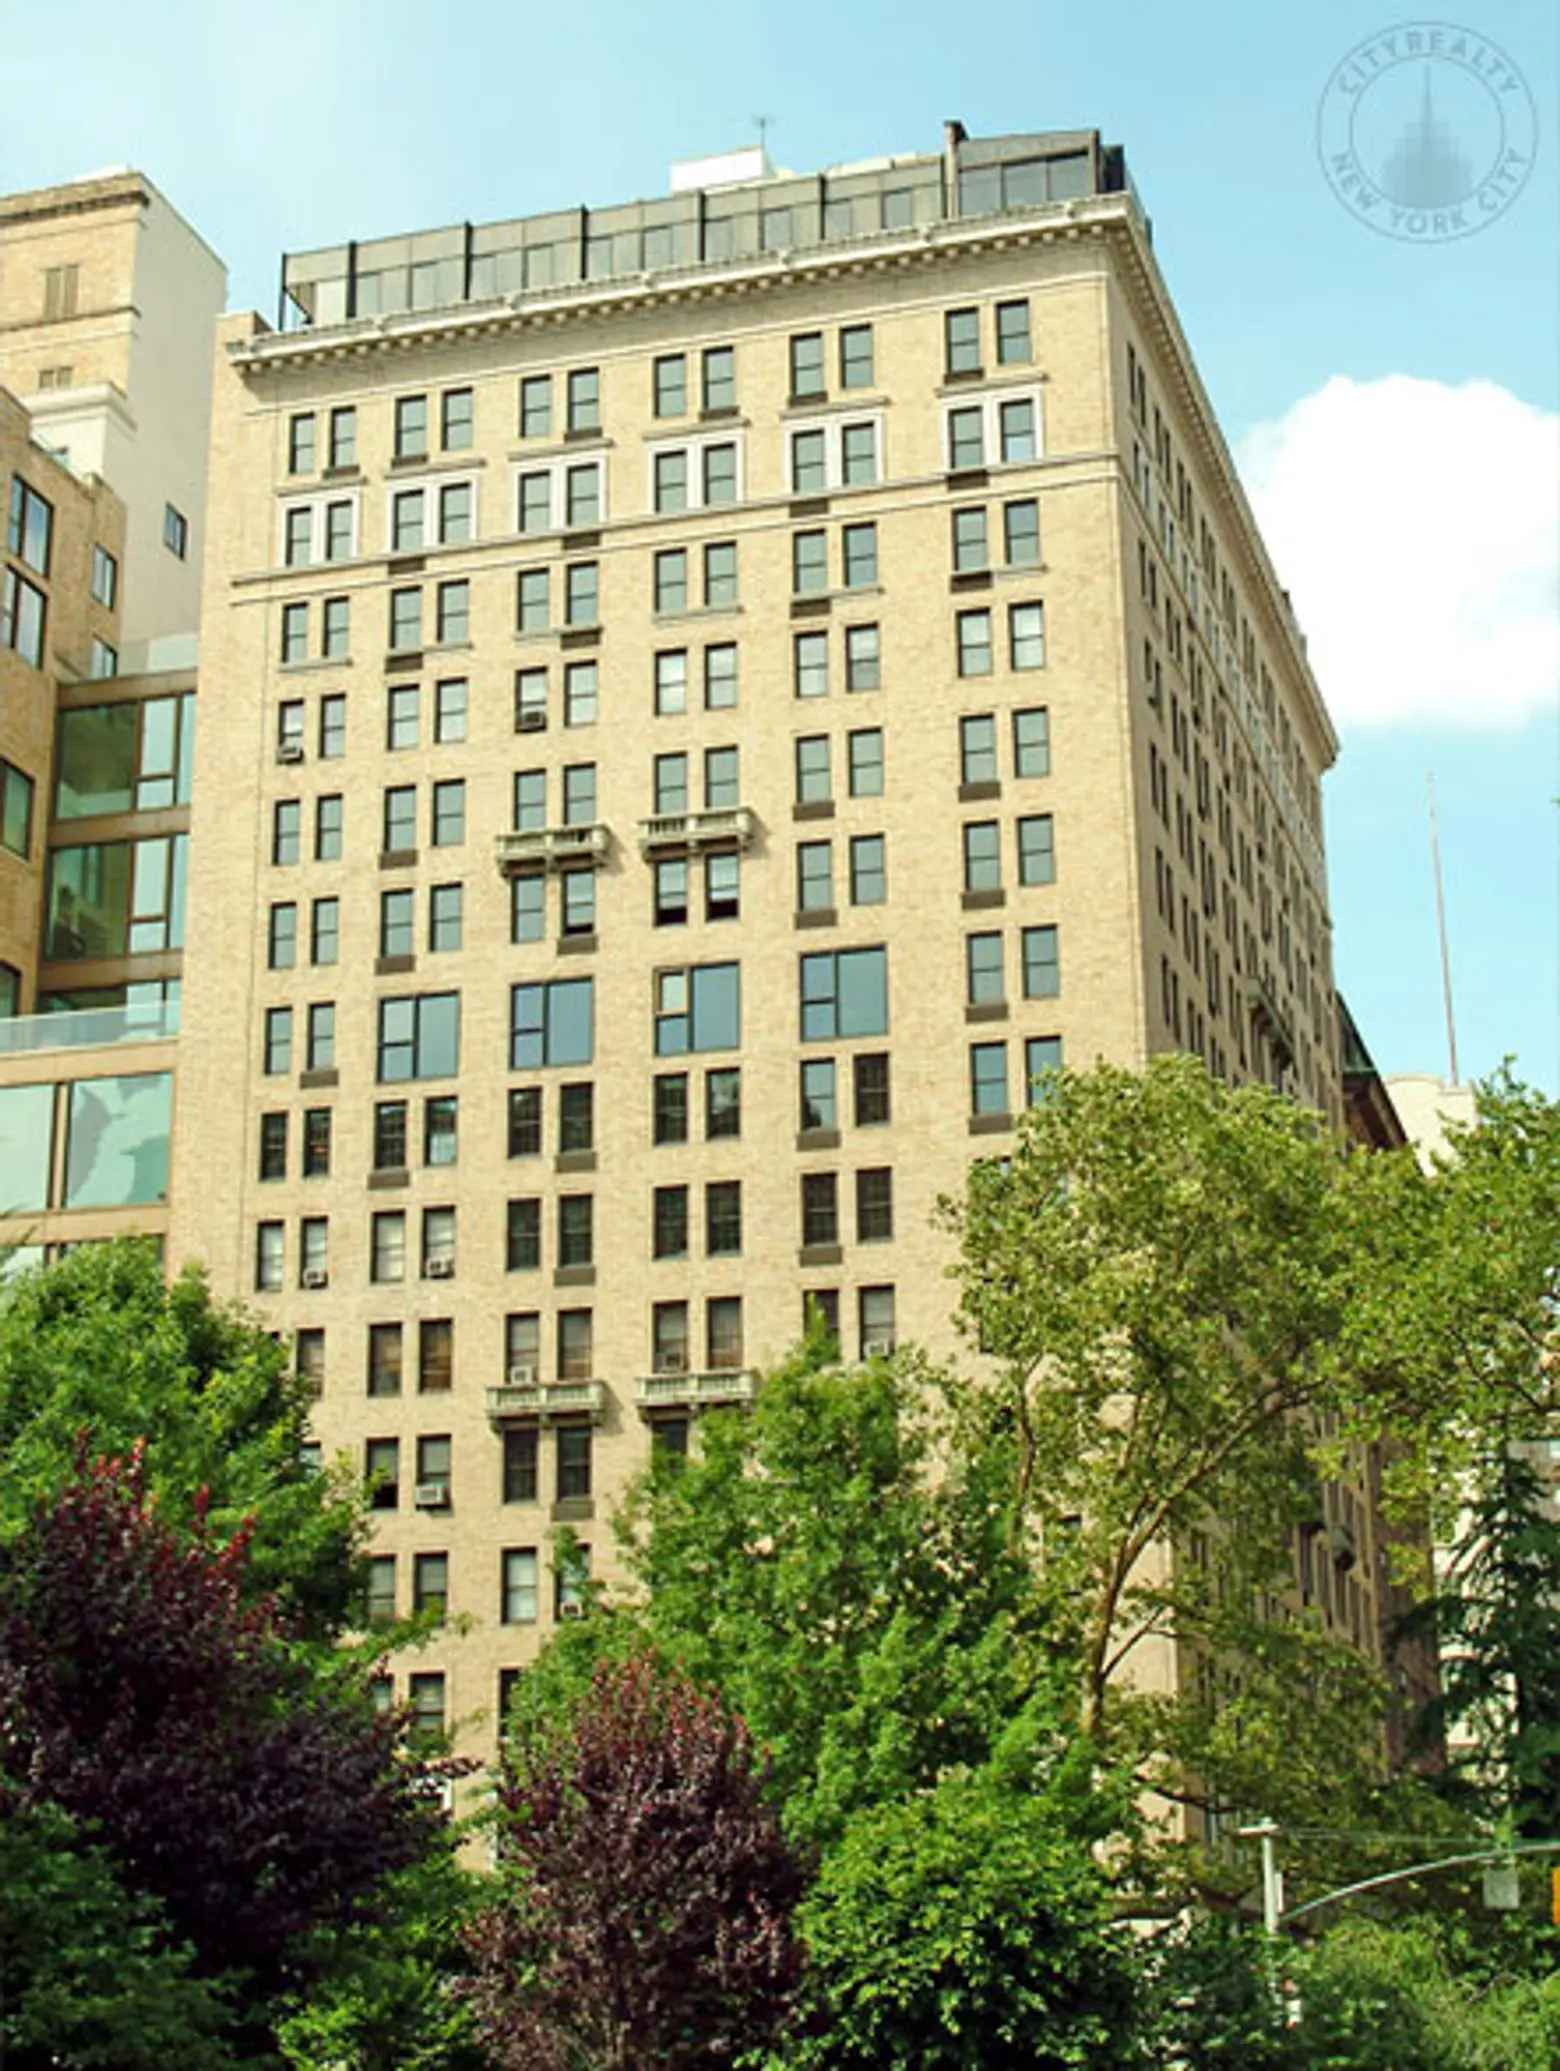 Gramercy Park Hotel Hits the Market and Could Fetch $260M